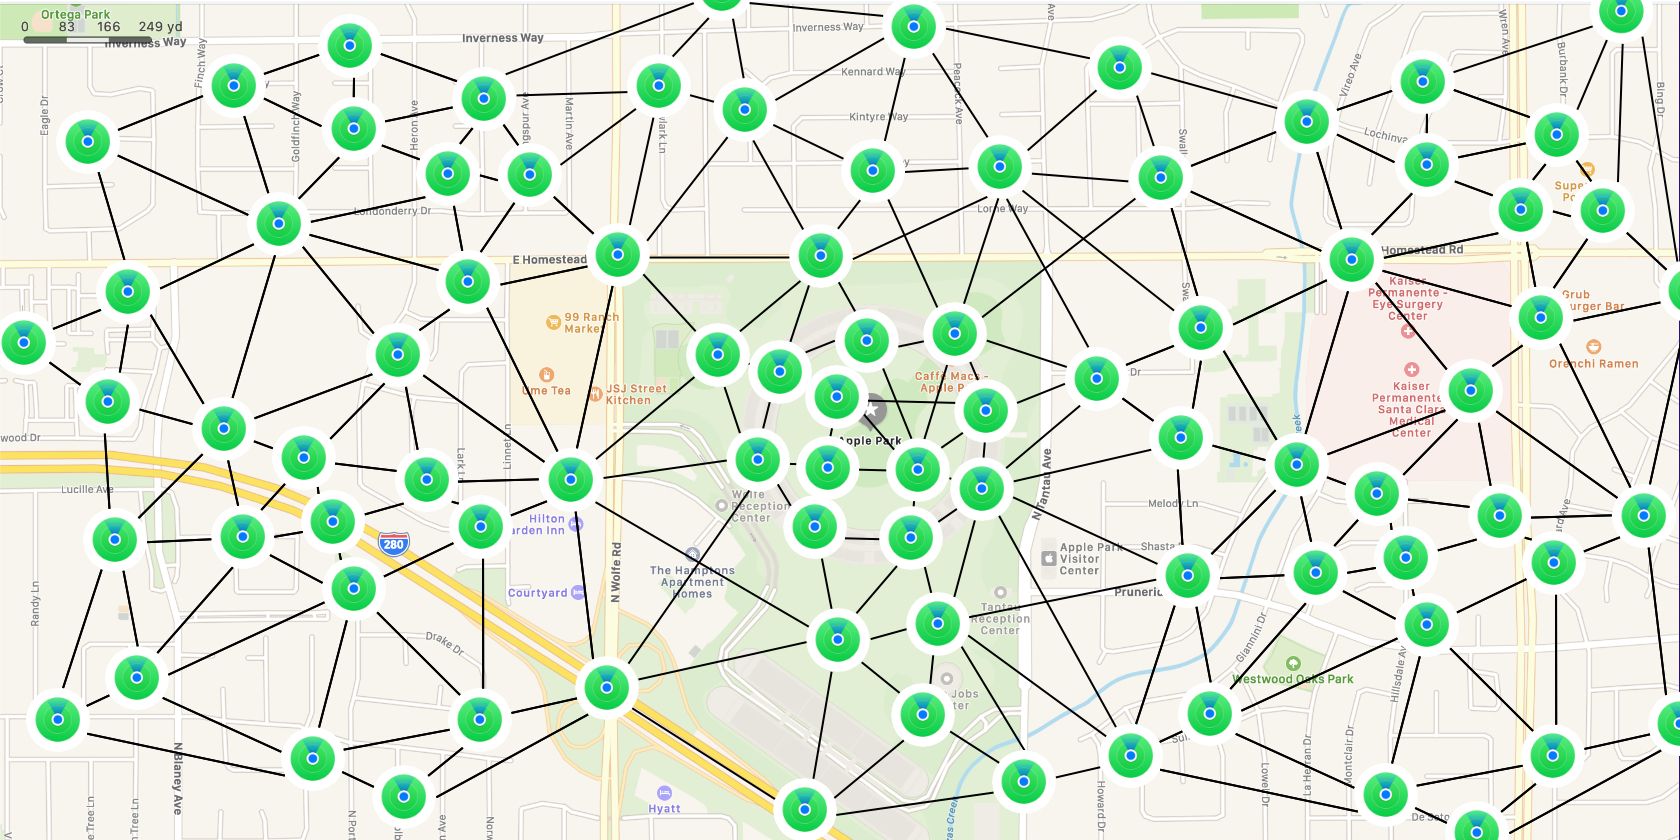 An example map of emulating what Apple's Find My network looks like.